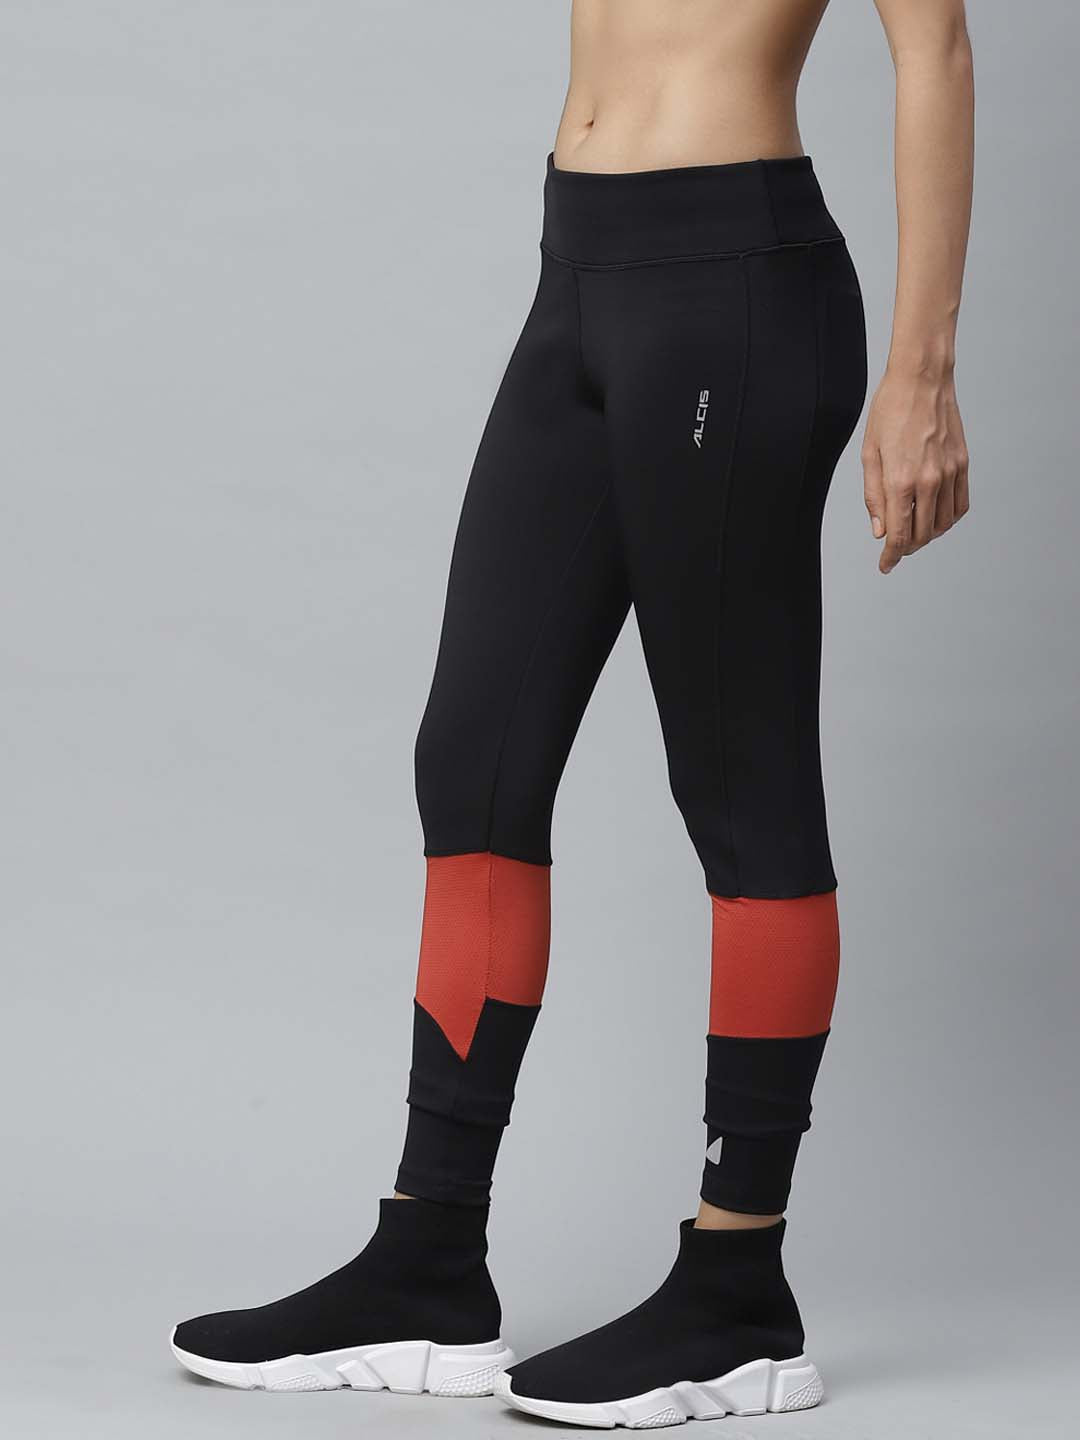 Alcis Women Black  Rust Orange Colourblocked Fitted Cropped Running Tights